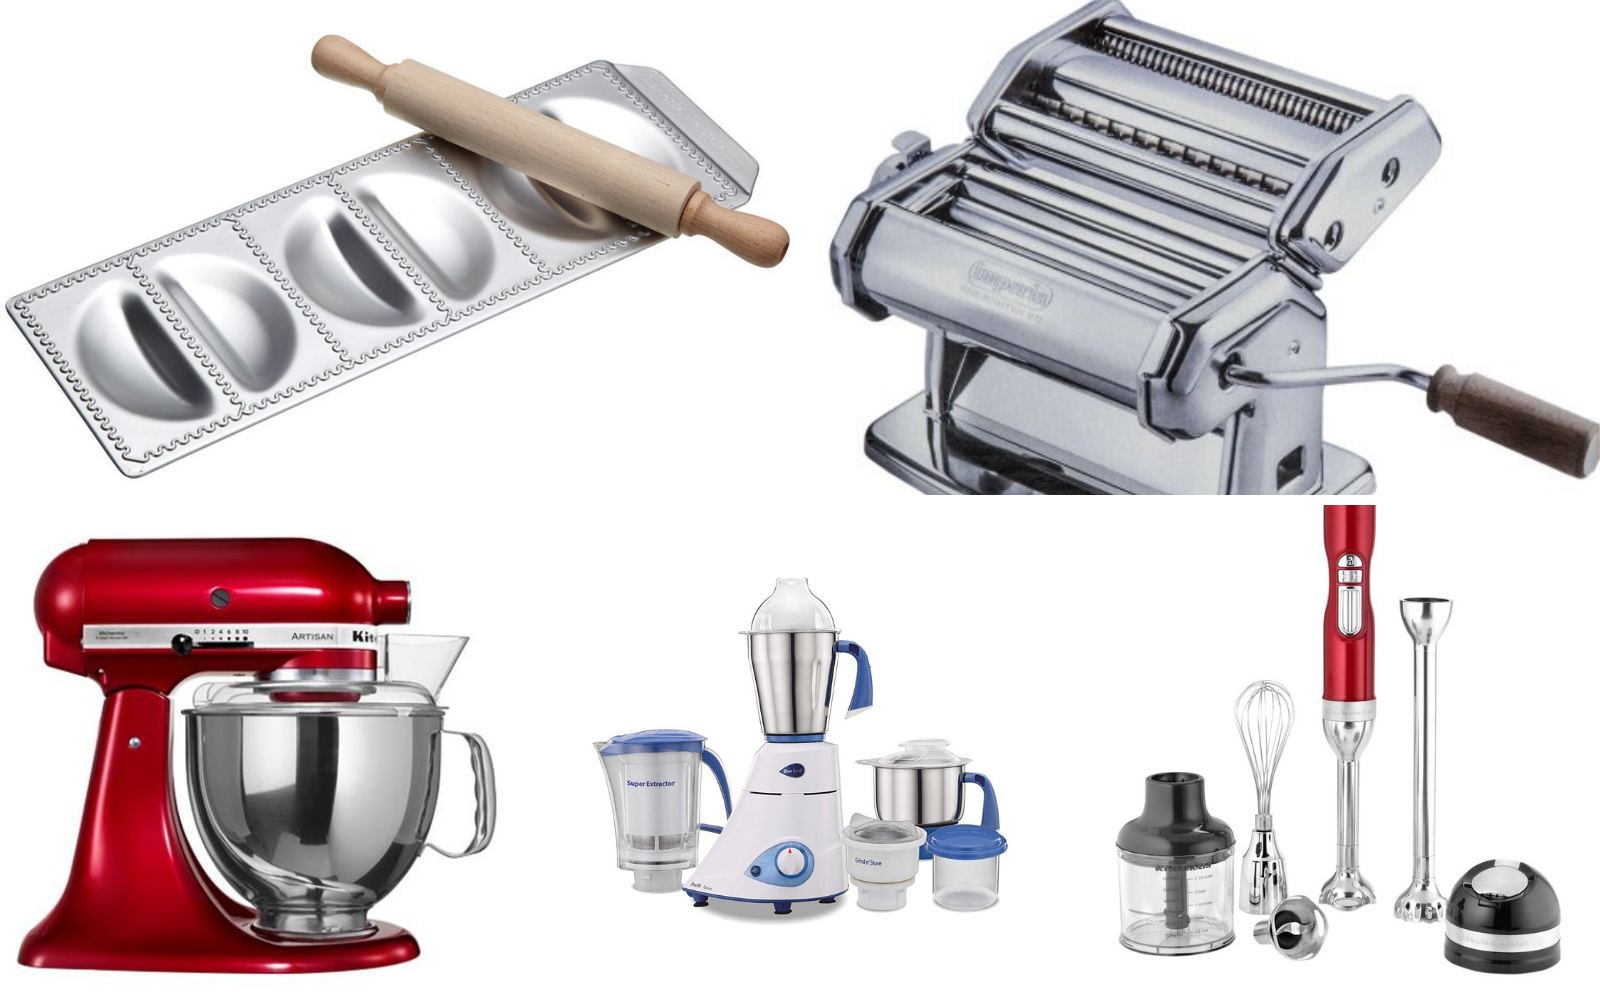 10 Basic Kitchen Appliances Every Home Needs To Have by Archana's Kitchen